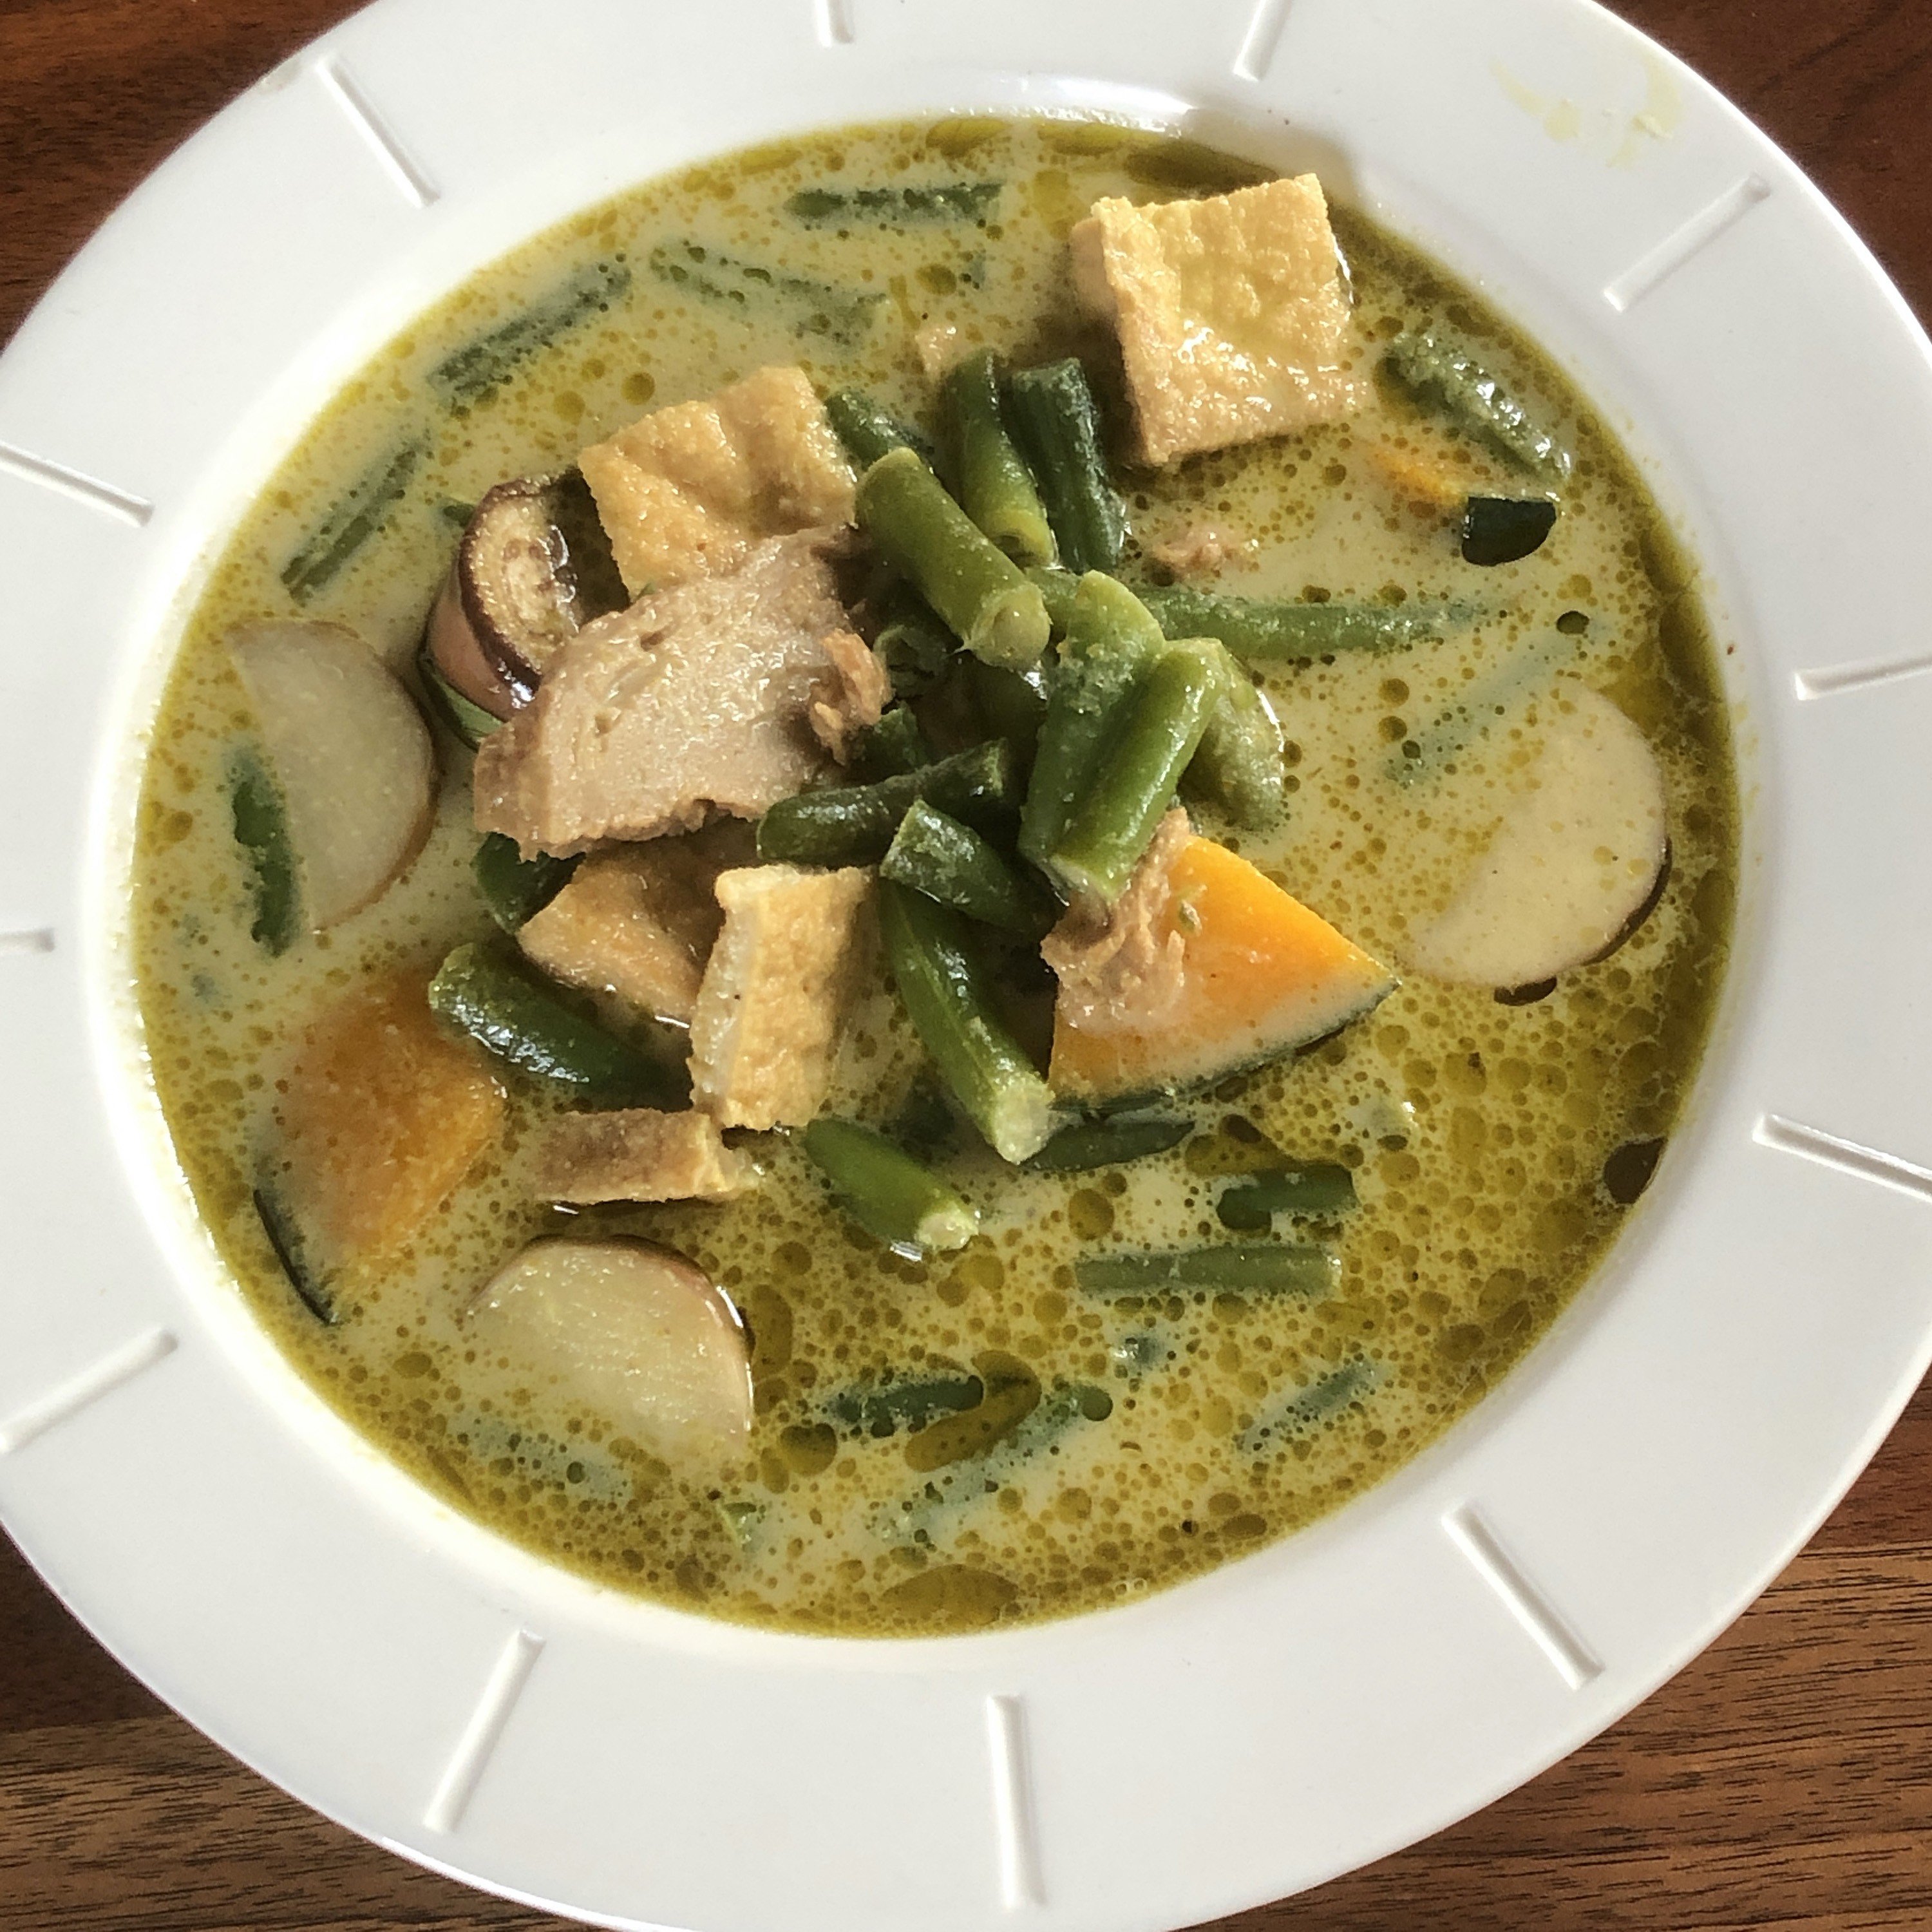 Thai Cafe&#146;s green curry is loaded with crisp-tender vegetables and your choice of meat, tofu or wheat-based mock chicken in a coconut milk broth that&#146;s spicy enough to get your attention.